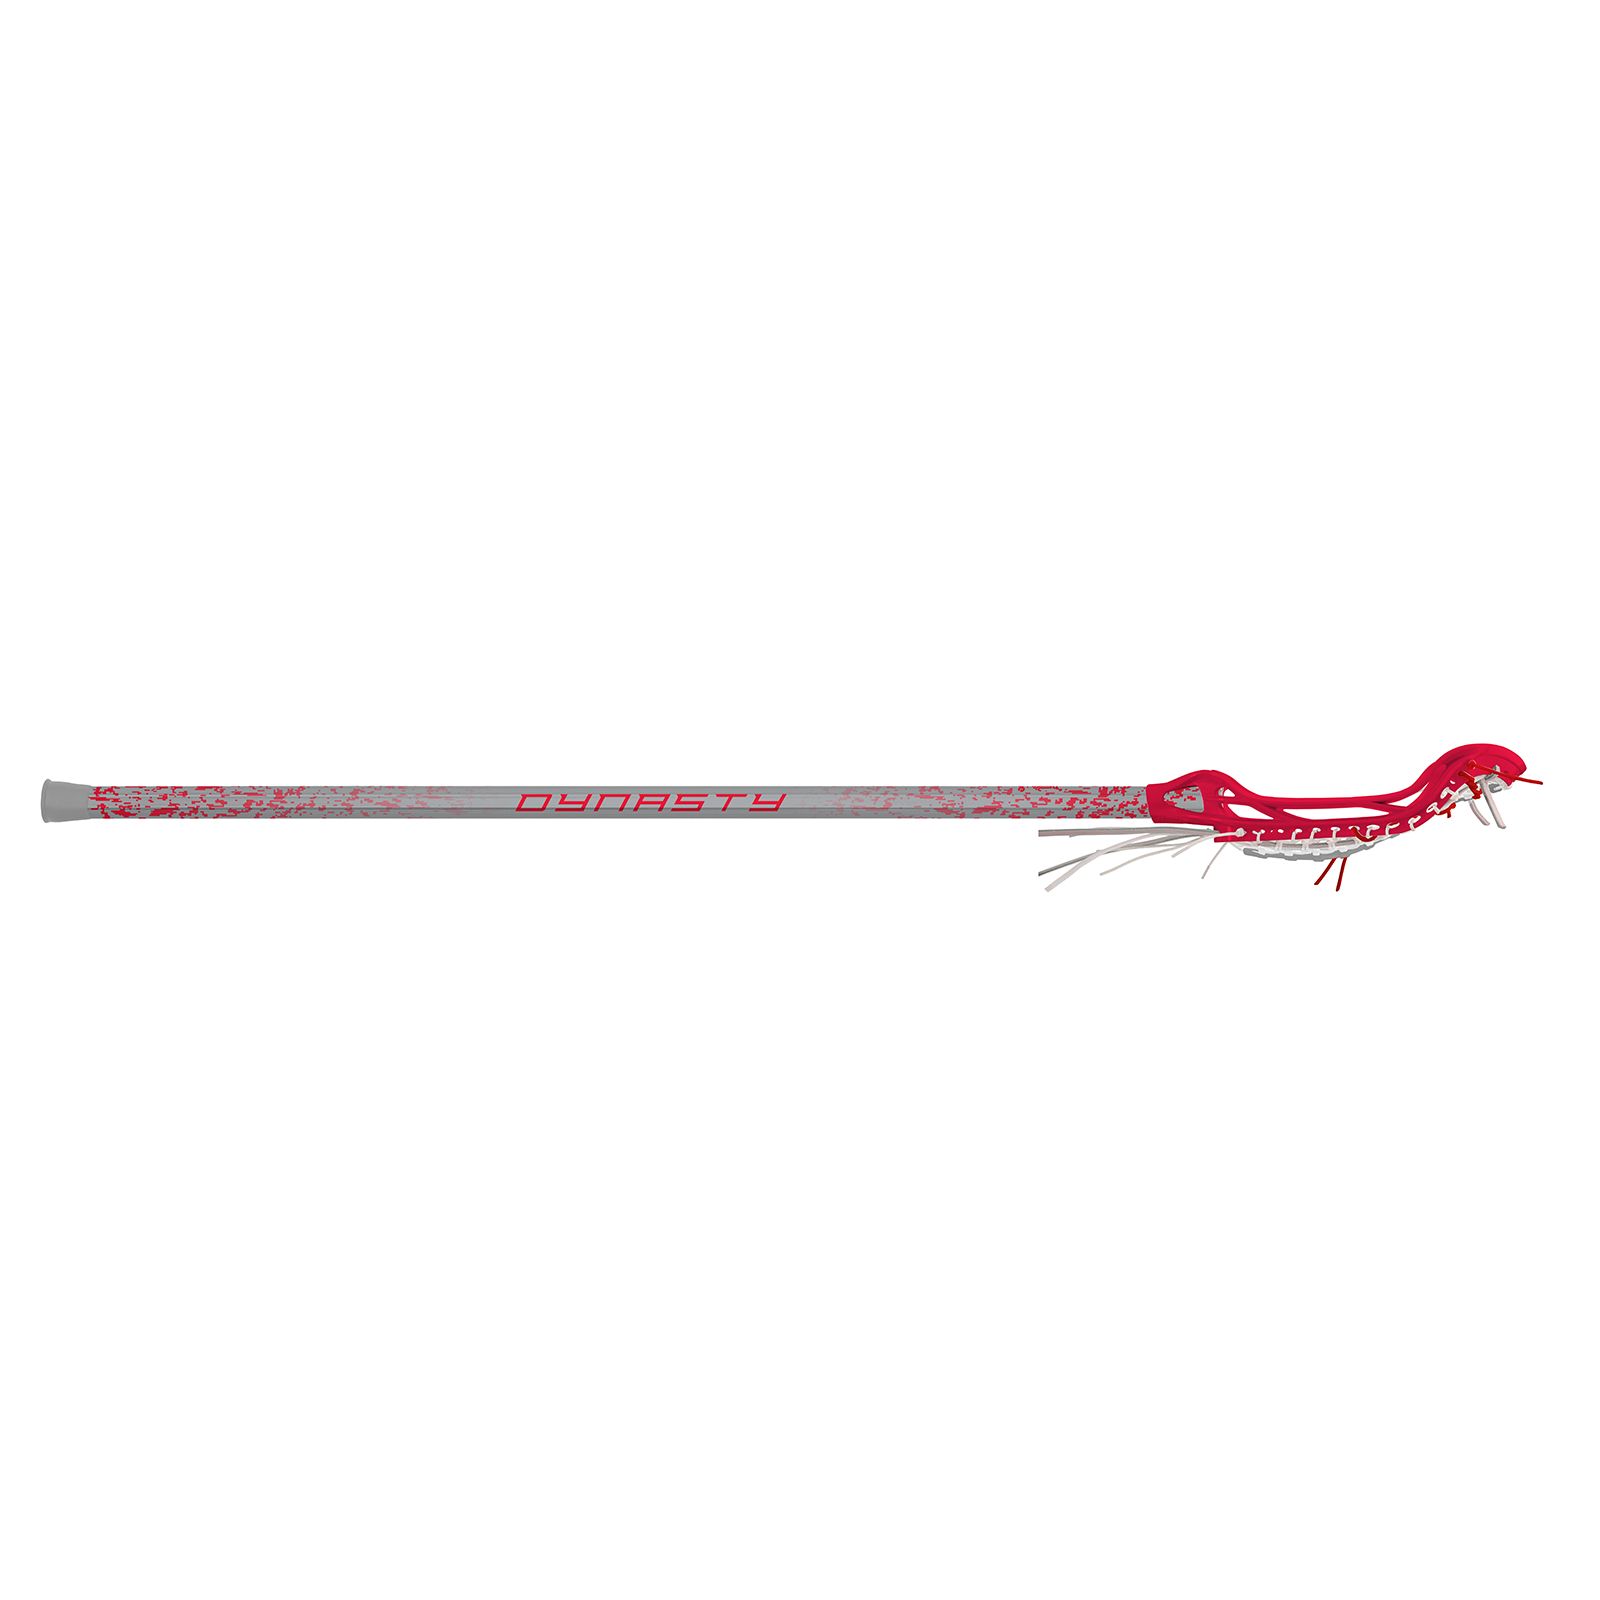 Dynasty Digi Print Stick, Grey with Red image number 0